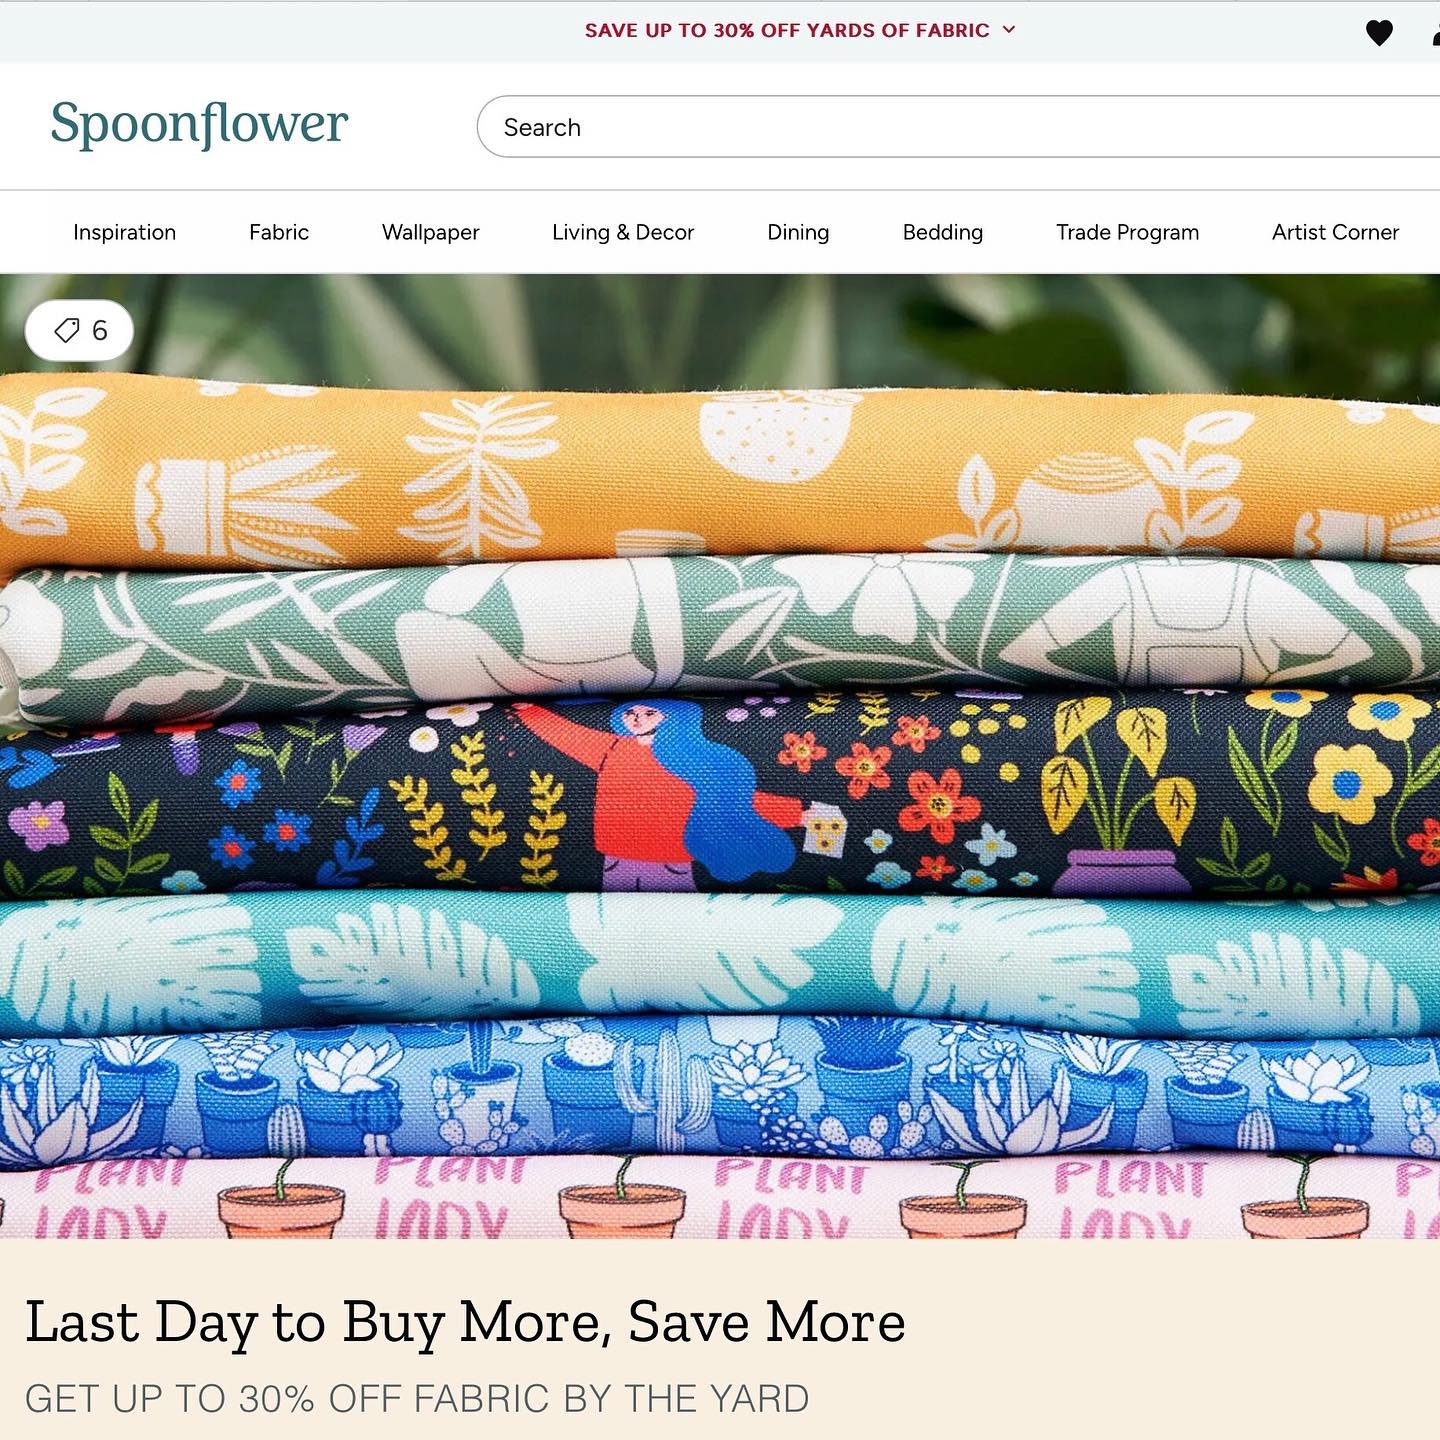 Super excited to spot my Succulents design on Spoonflower&rsquo;s front page today 😄 It&rsquo;s always been one of my faves ☺️

#spoonflower #spoonflowerdesigner #patterndesign #fabricdesign #artlicensing #succulents #cactiipattern #ipreview via @pr